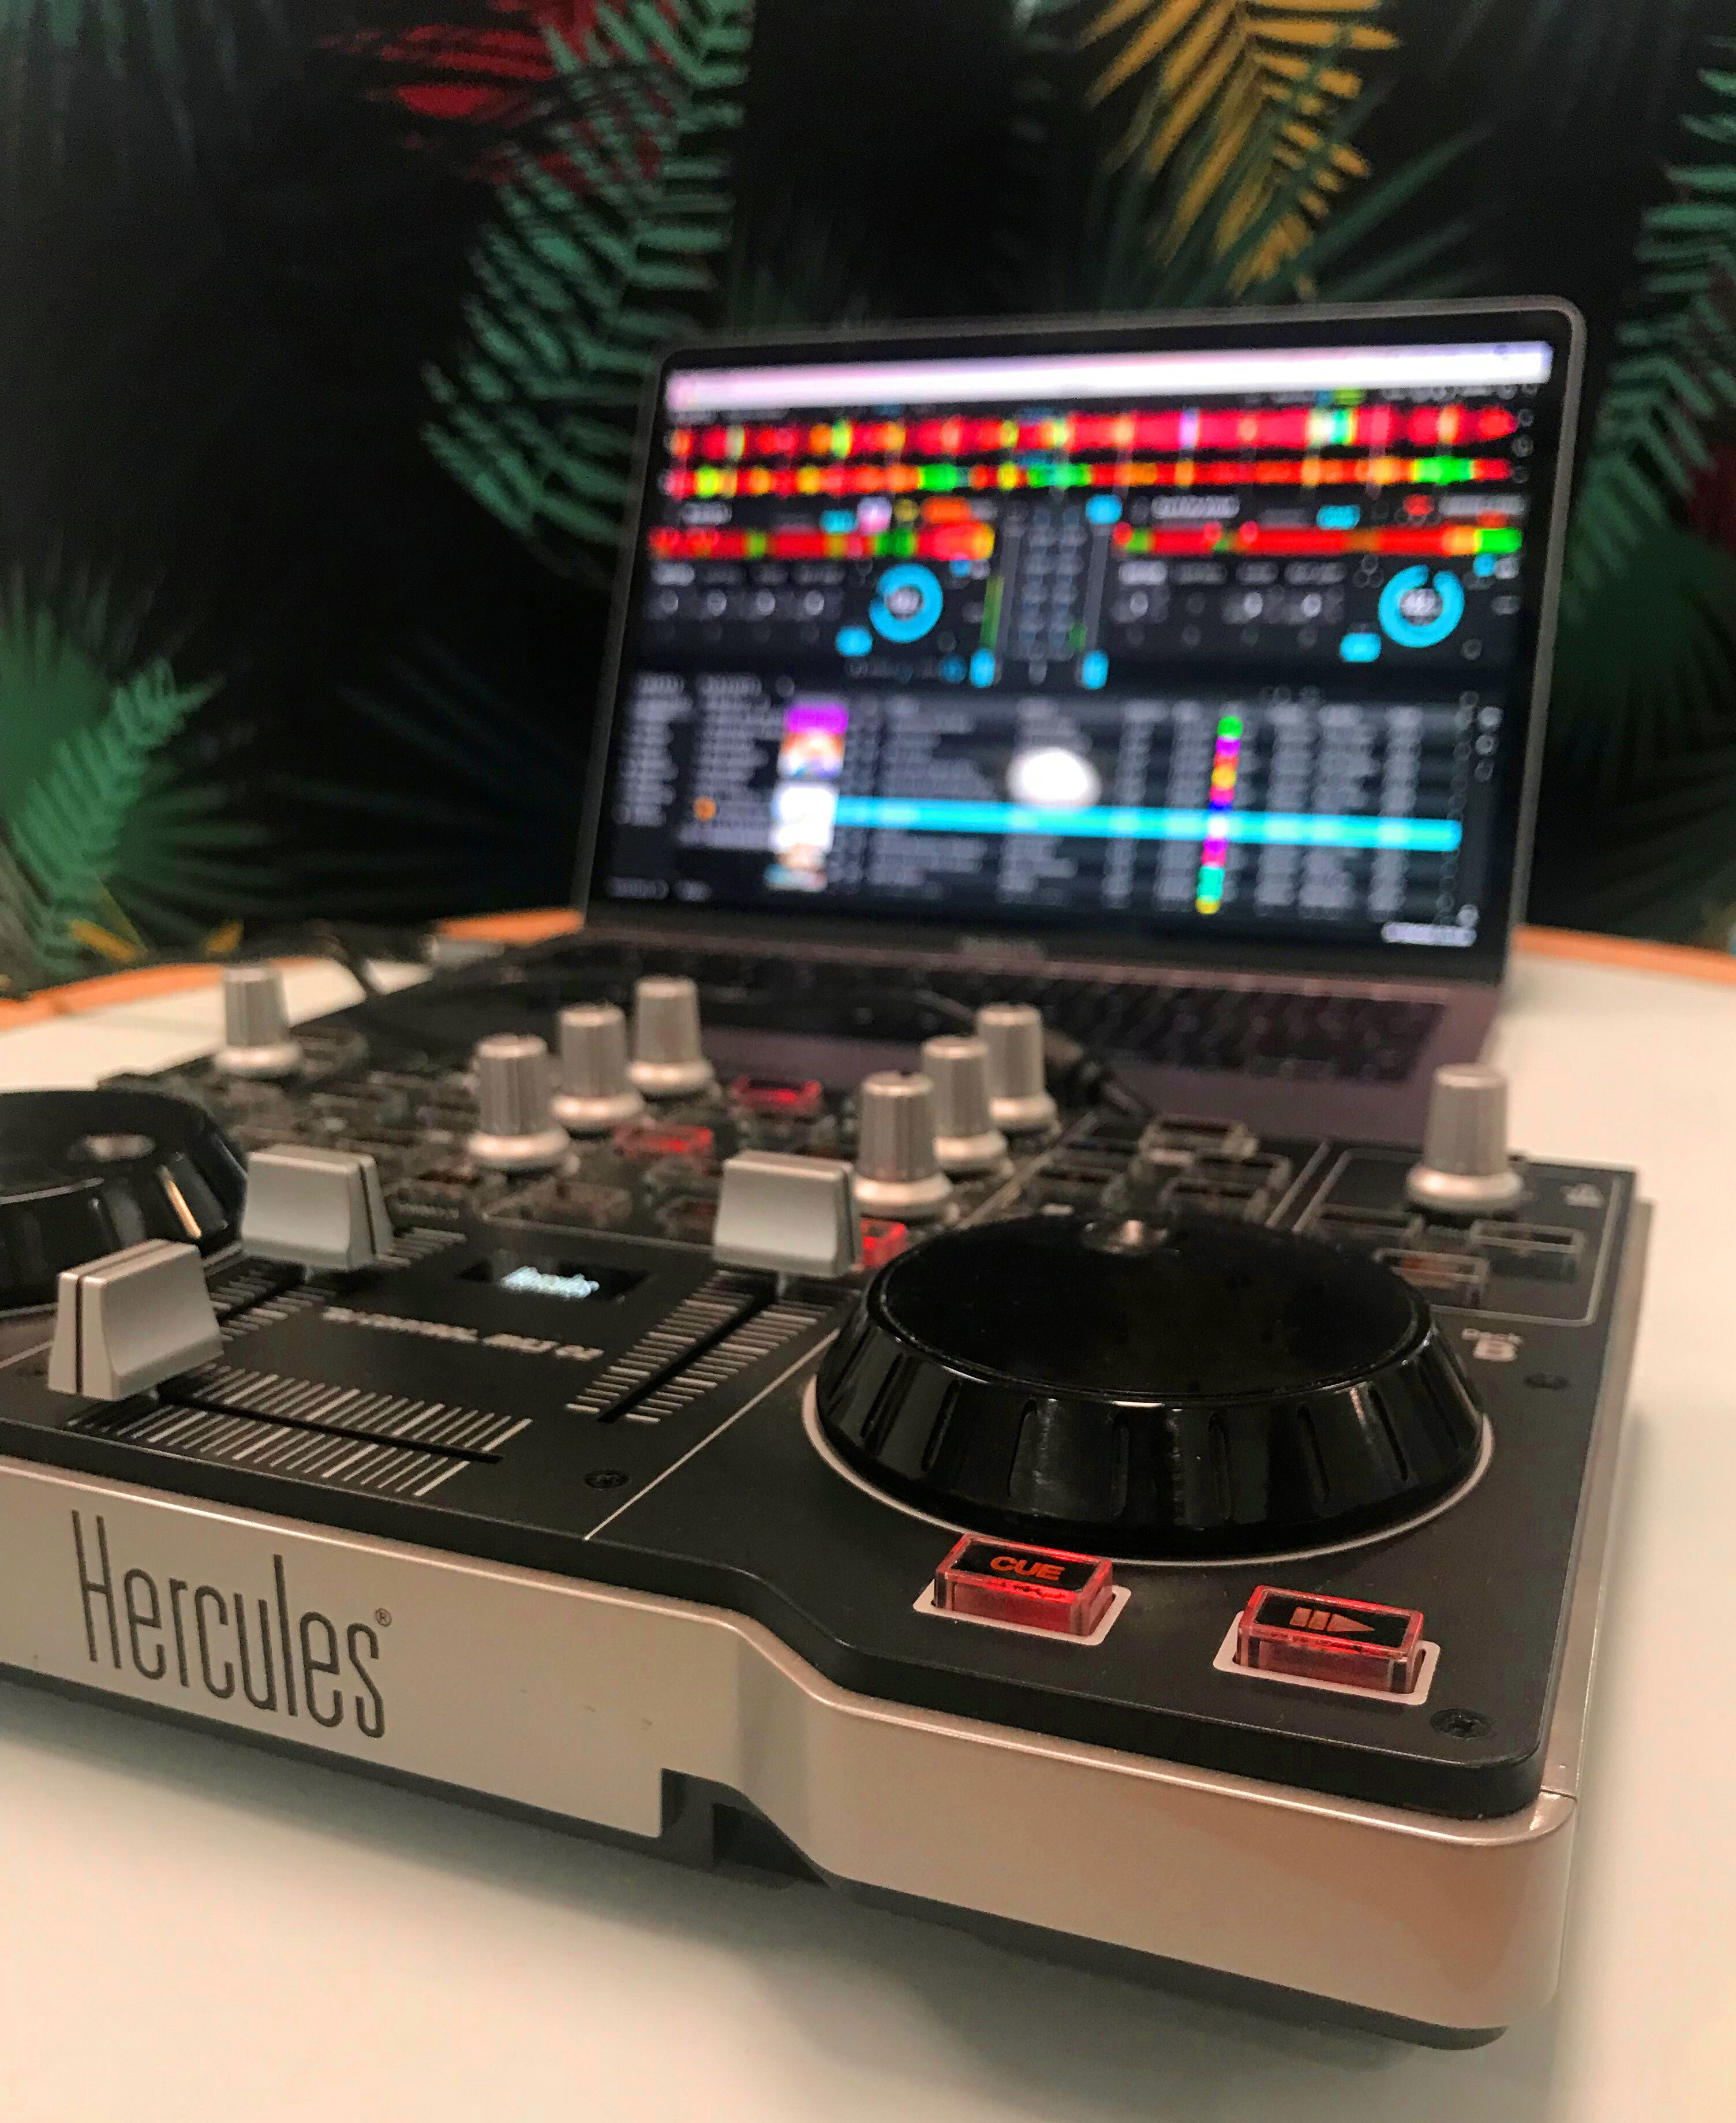 Hercules Audio on Twitter: "#HerculesTBT DJUCED 5.0.6 is out and you can  now use it with your DJControl MP3 e2 🙌🔥 Send us your pics using DJUCED  with this classic! 📸 #MP3e2 #